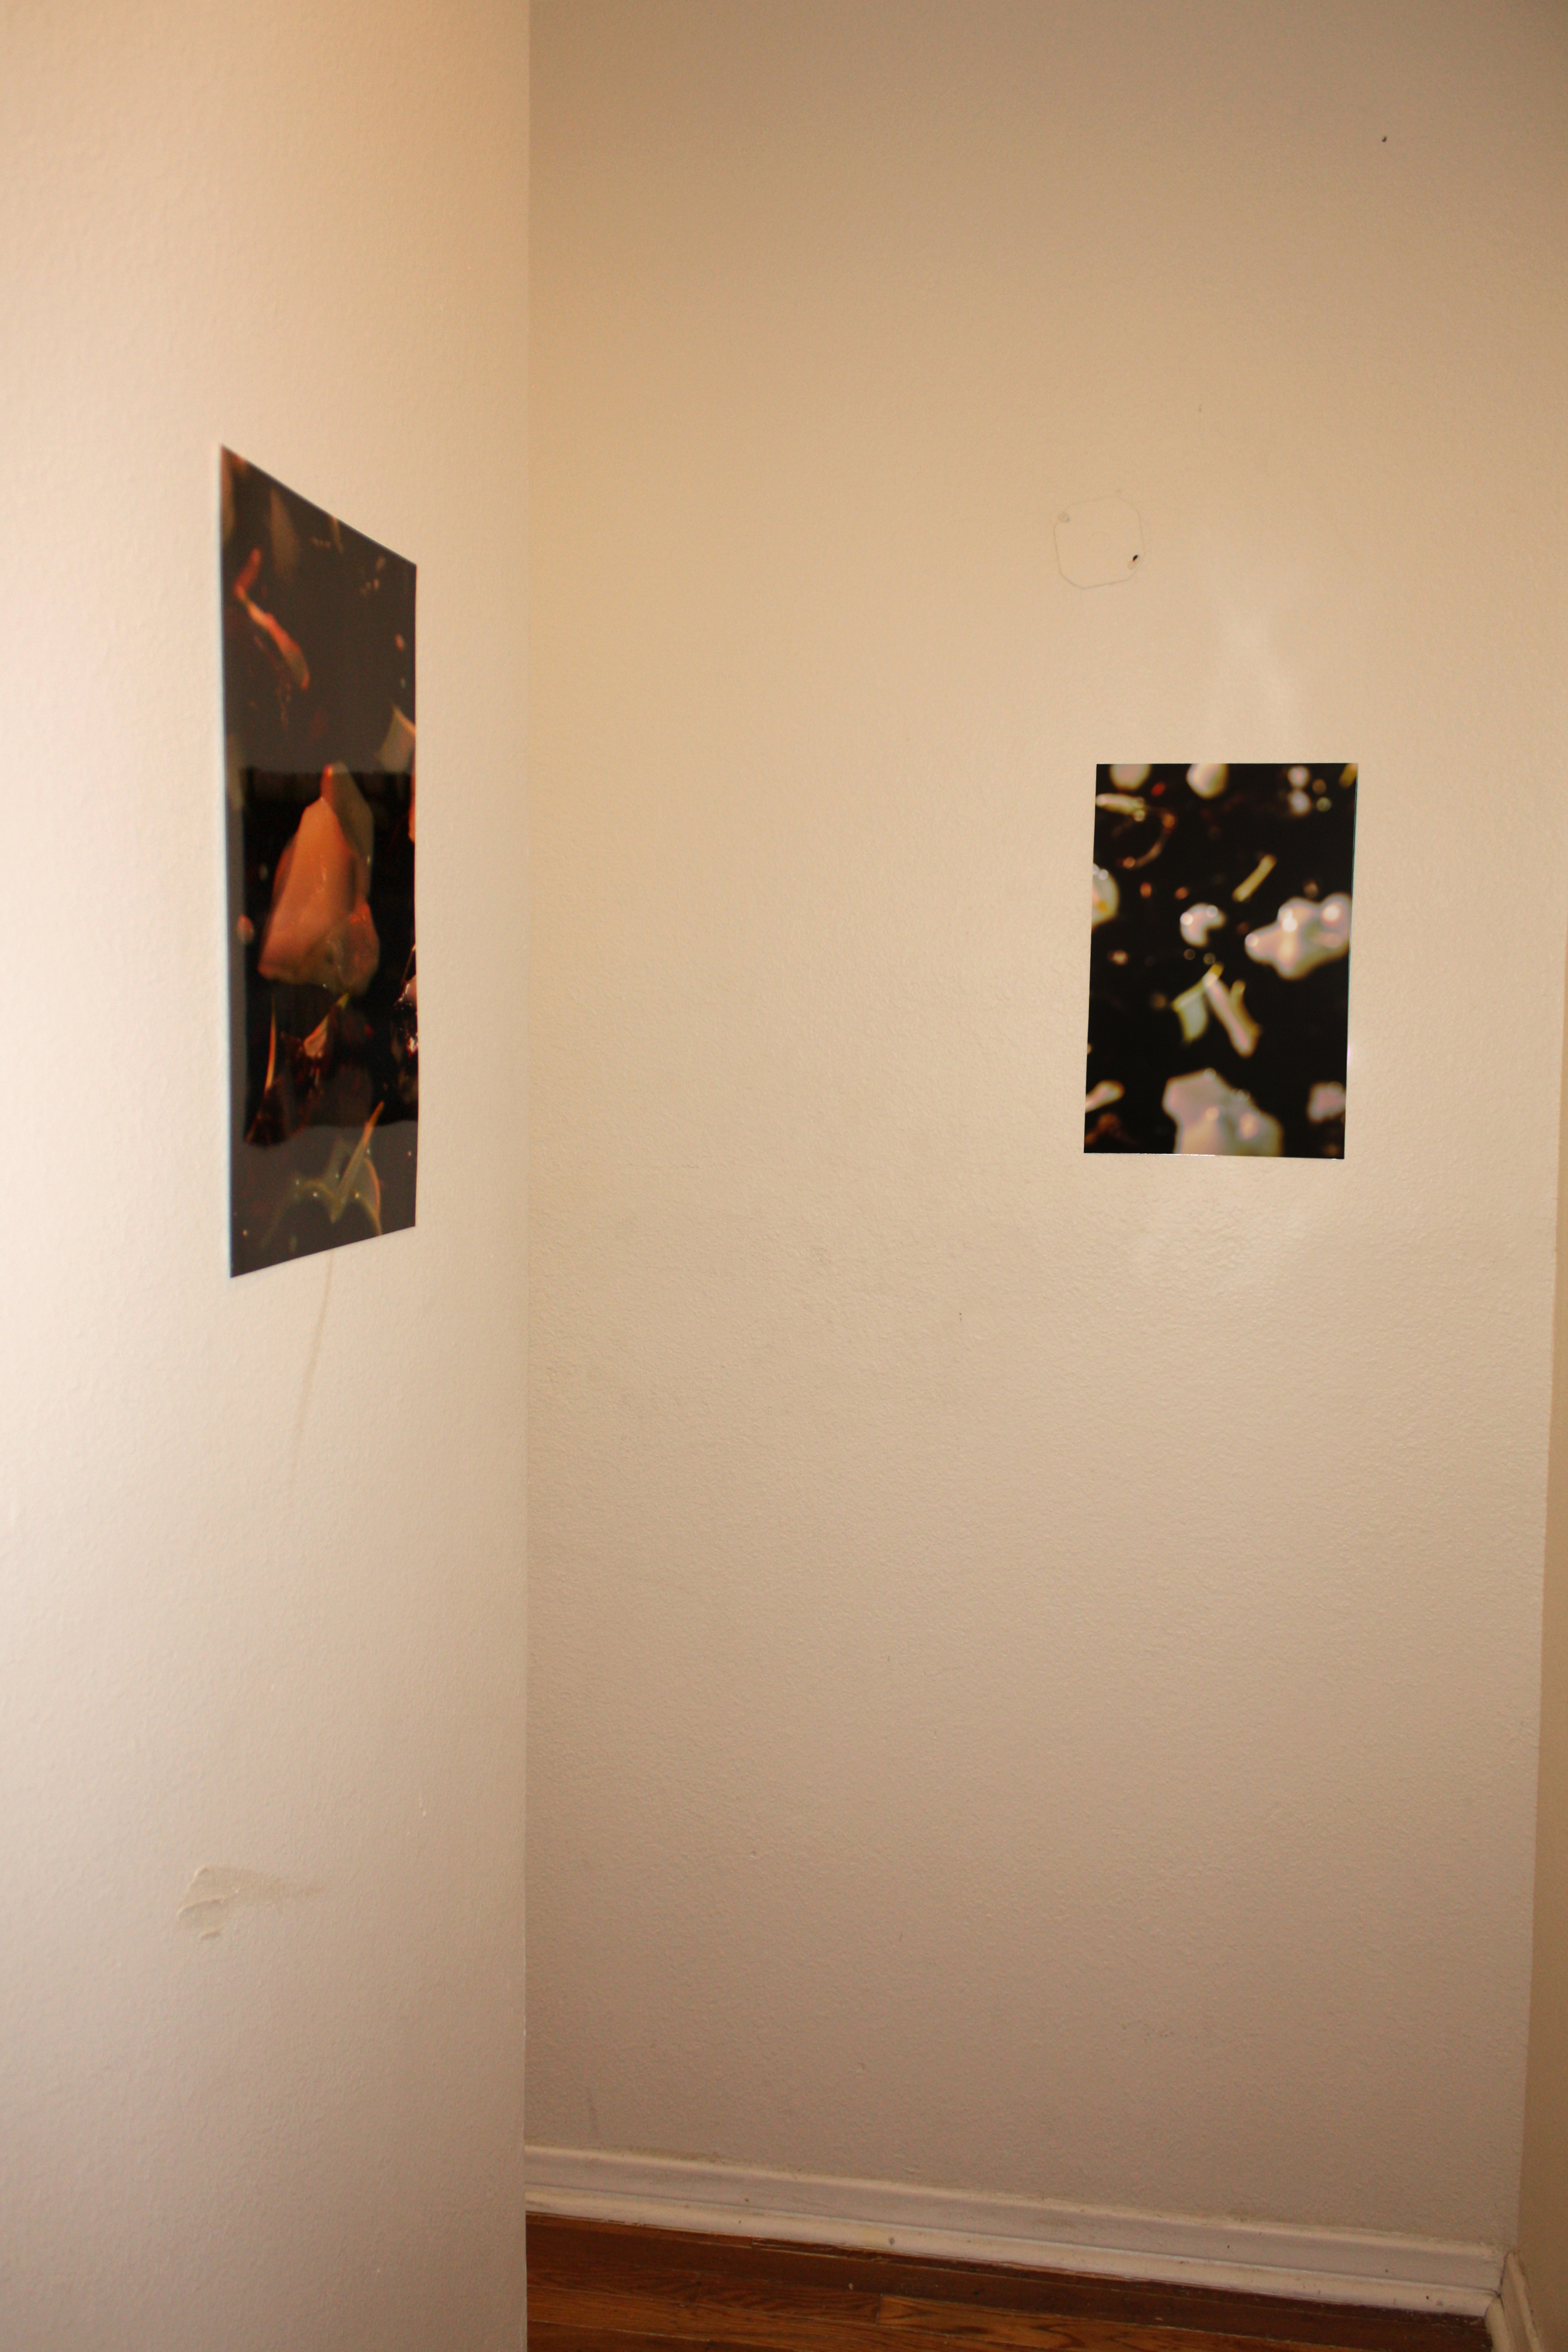 Two small glossy photo prints hung on white walls